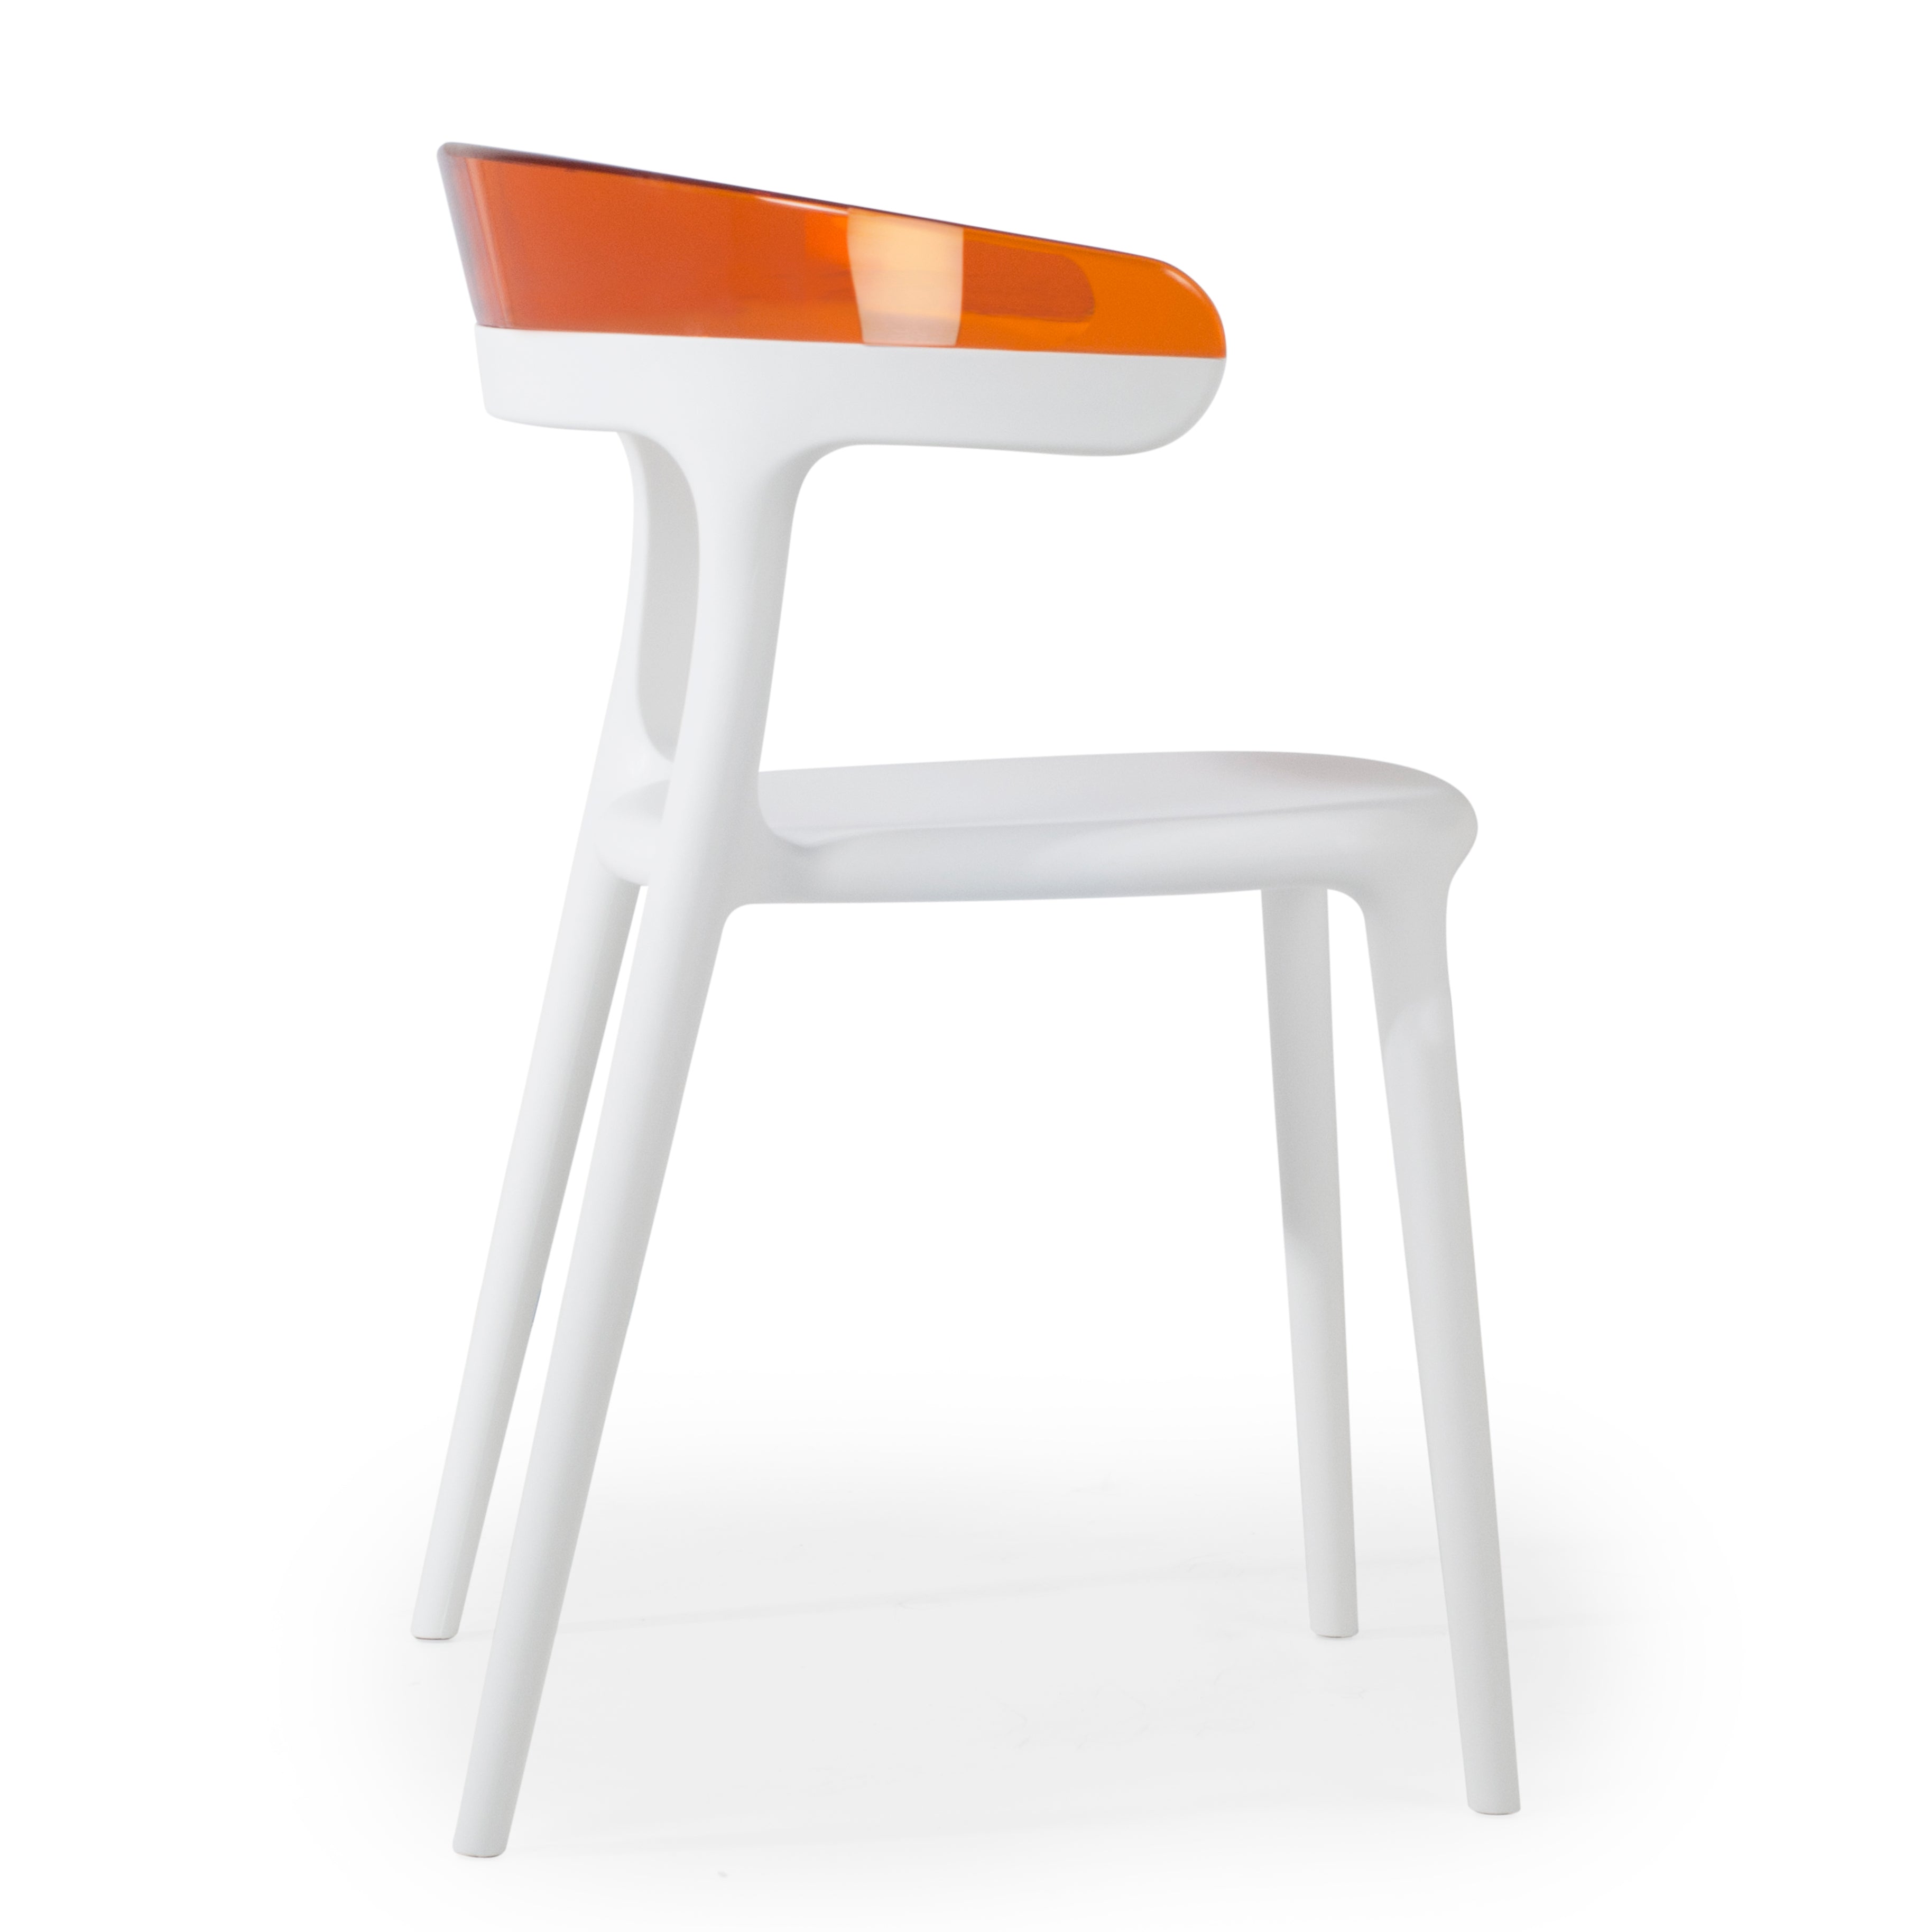 Mia Patio Dining Chair in White and Orange- (Set of 2)